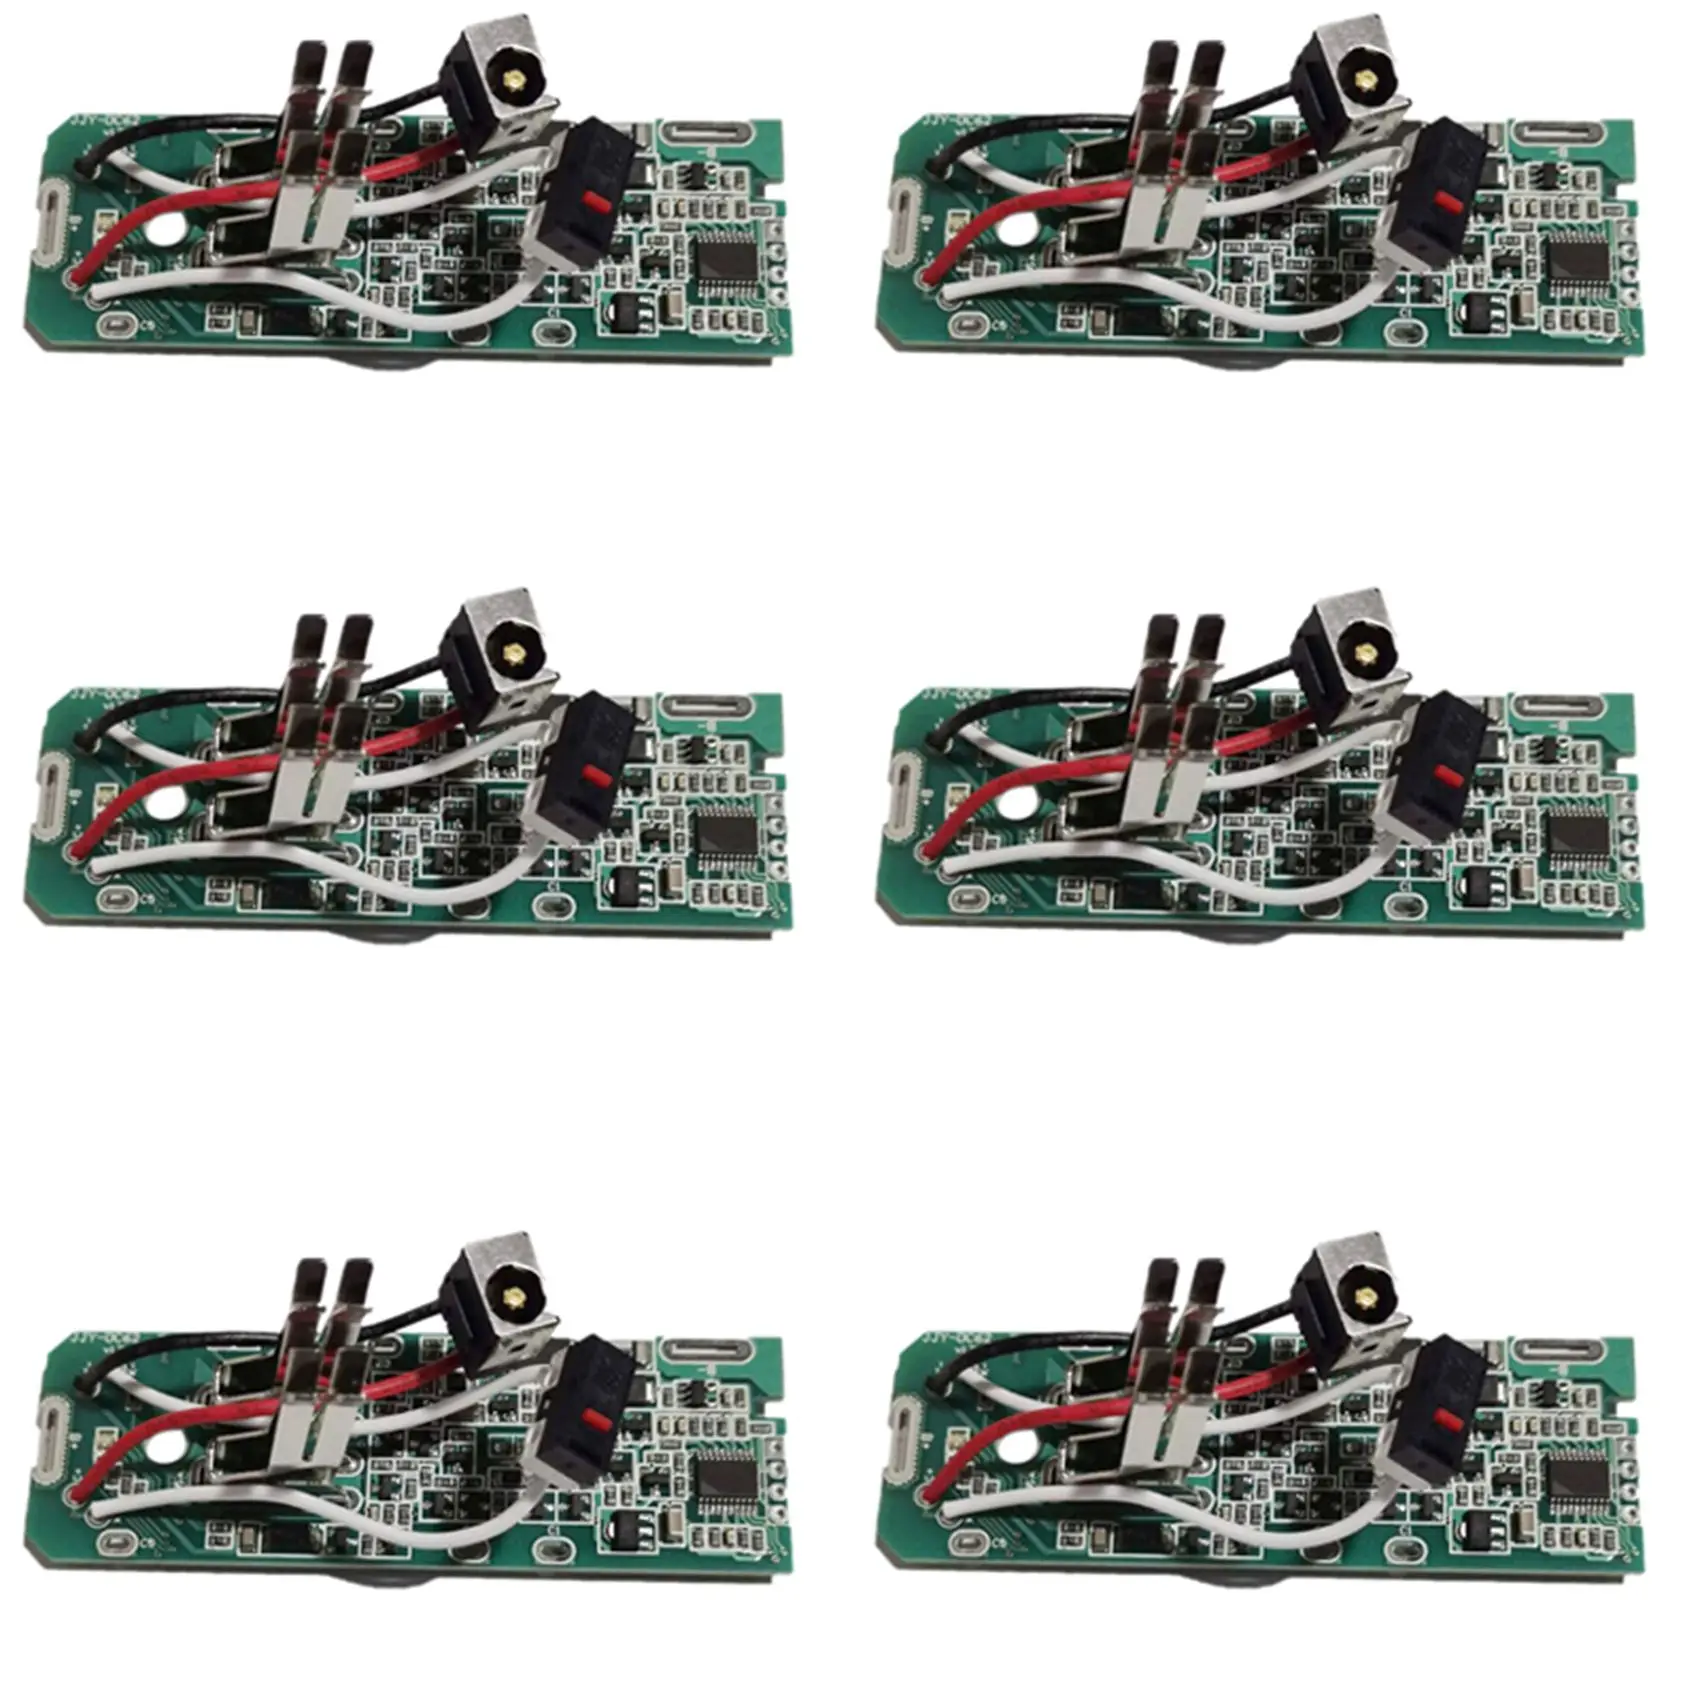 

6X Li-Ion Battery Charging PCB Protection Circuit Board for Dyson 21.6V V6 V7 Vacuum Cleaner